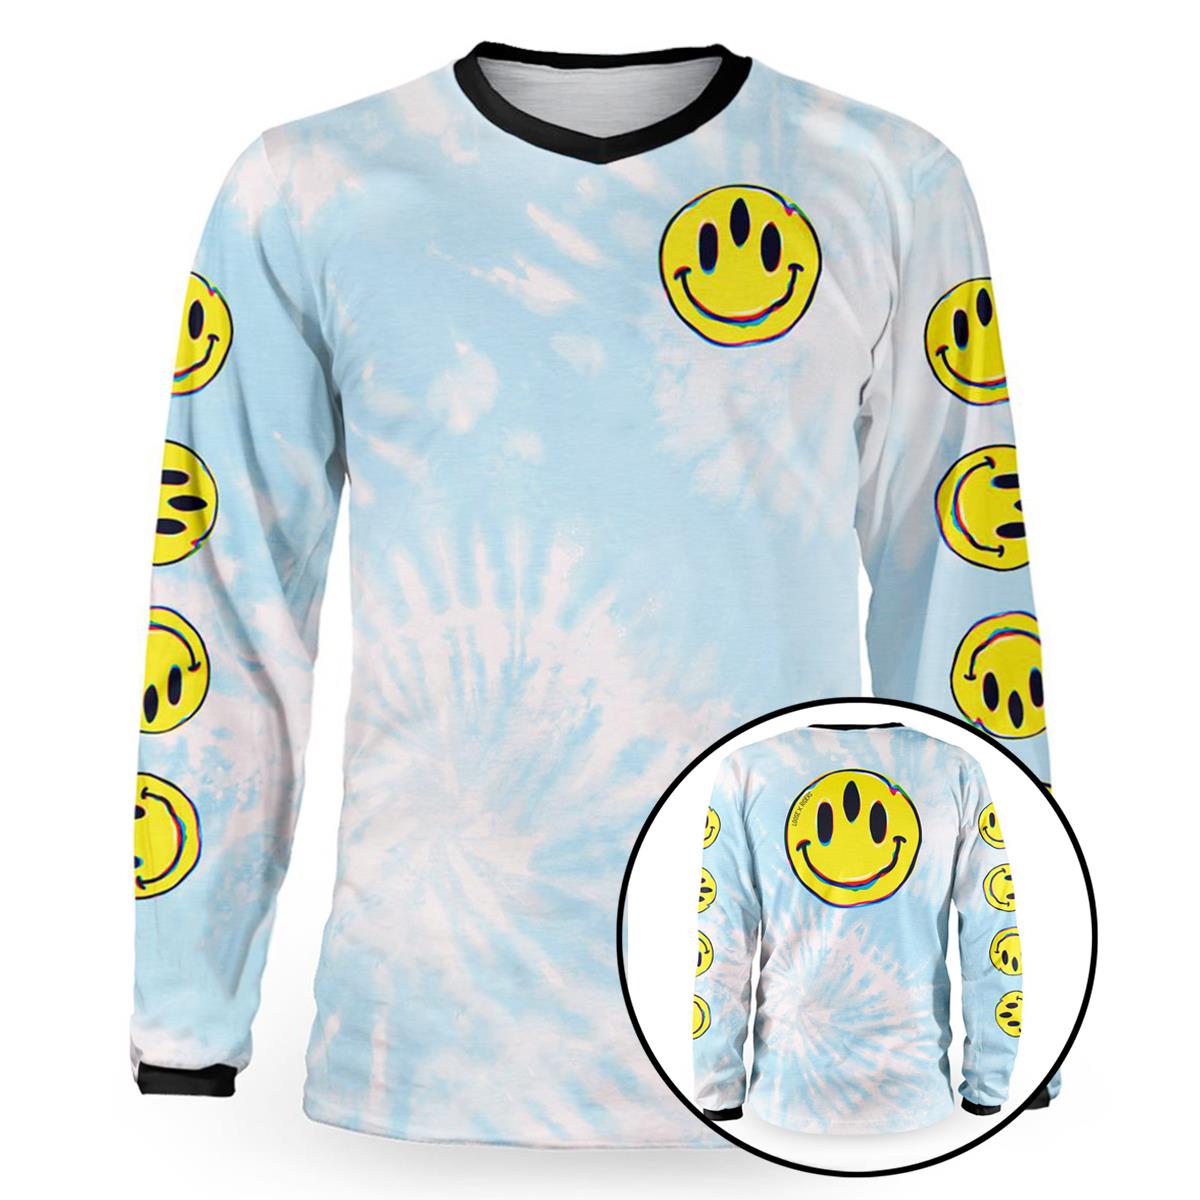 Loose Riders Downhill Jersey Long Sleeve Cult Of Shred Stoked! Blue/White